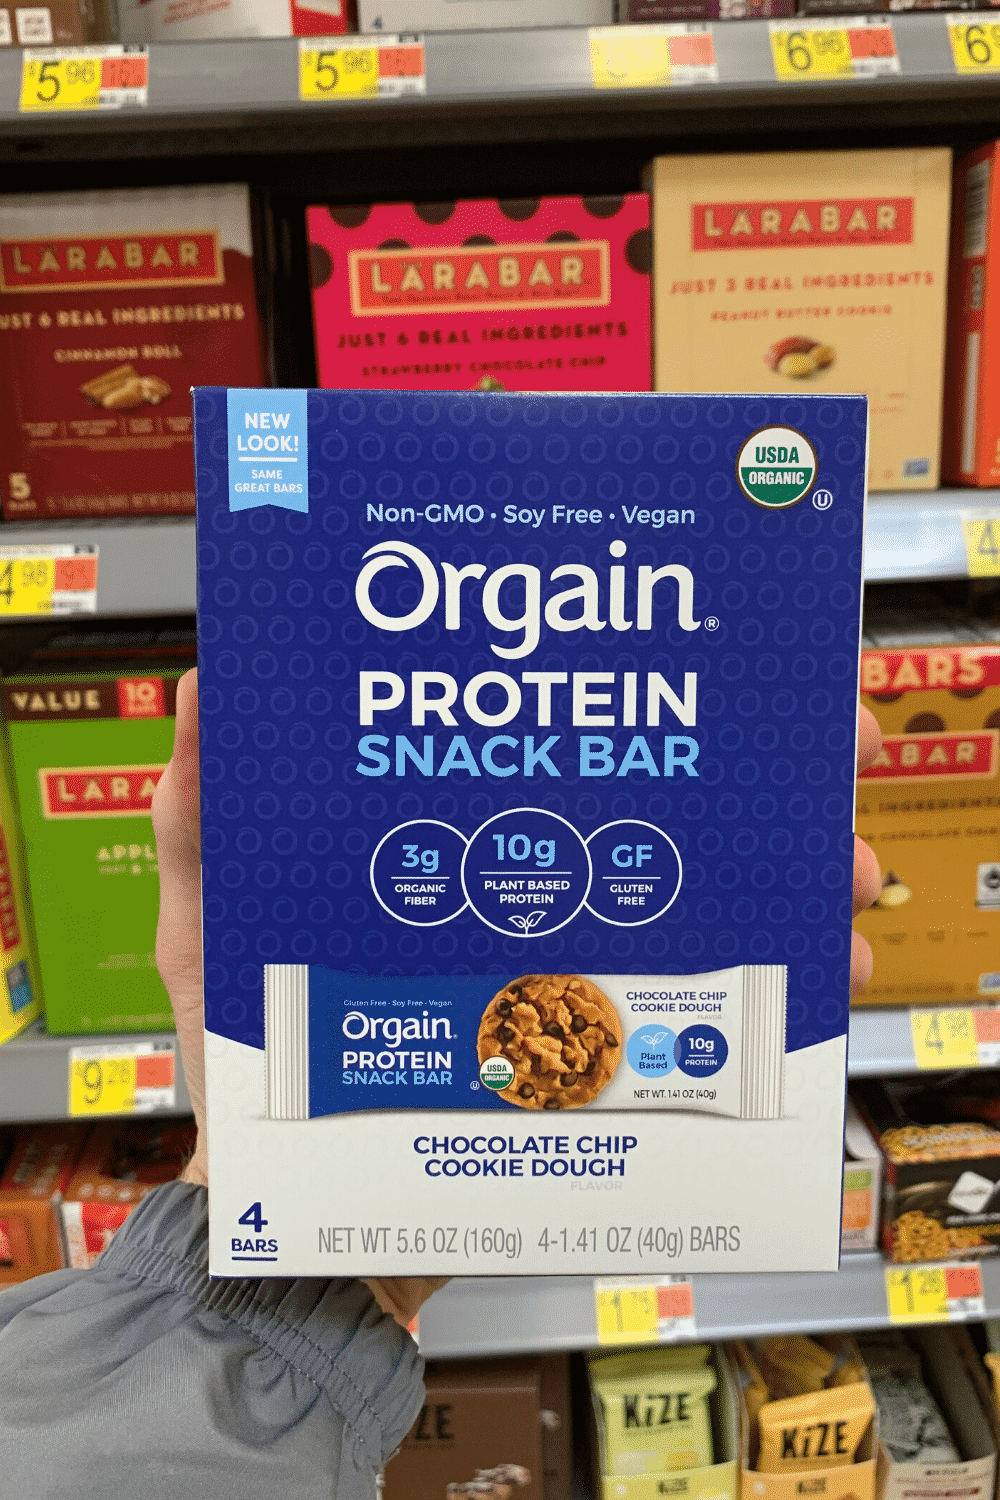 A hand holding Orgain protein snack bar chocolate chip cookie dough.